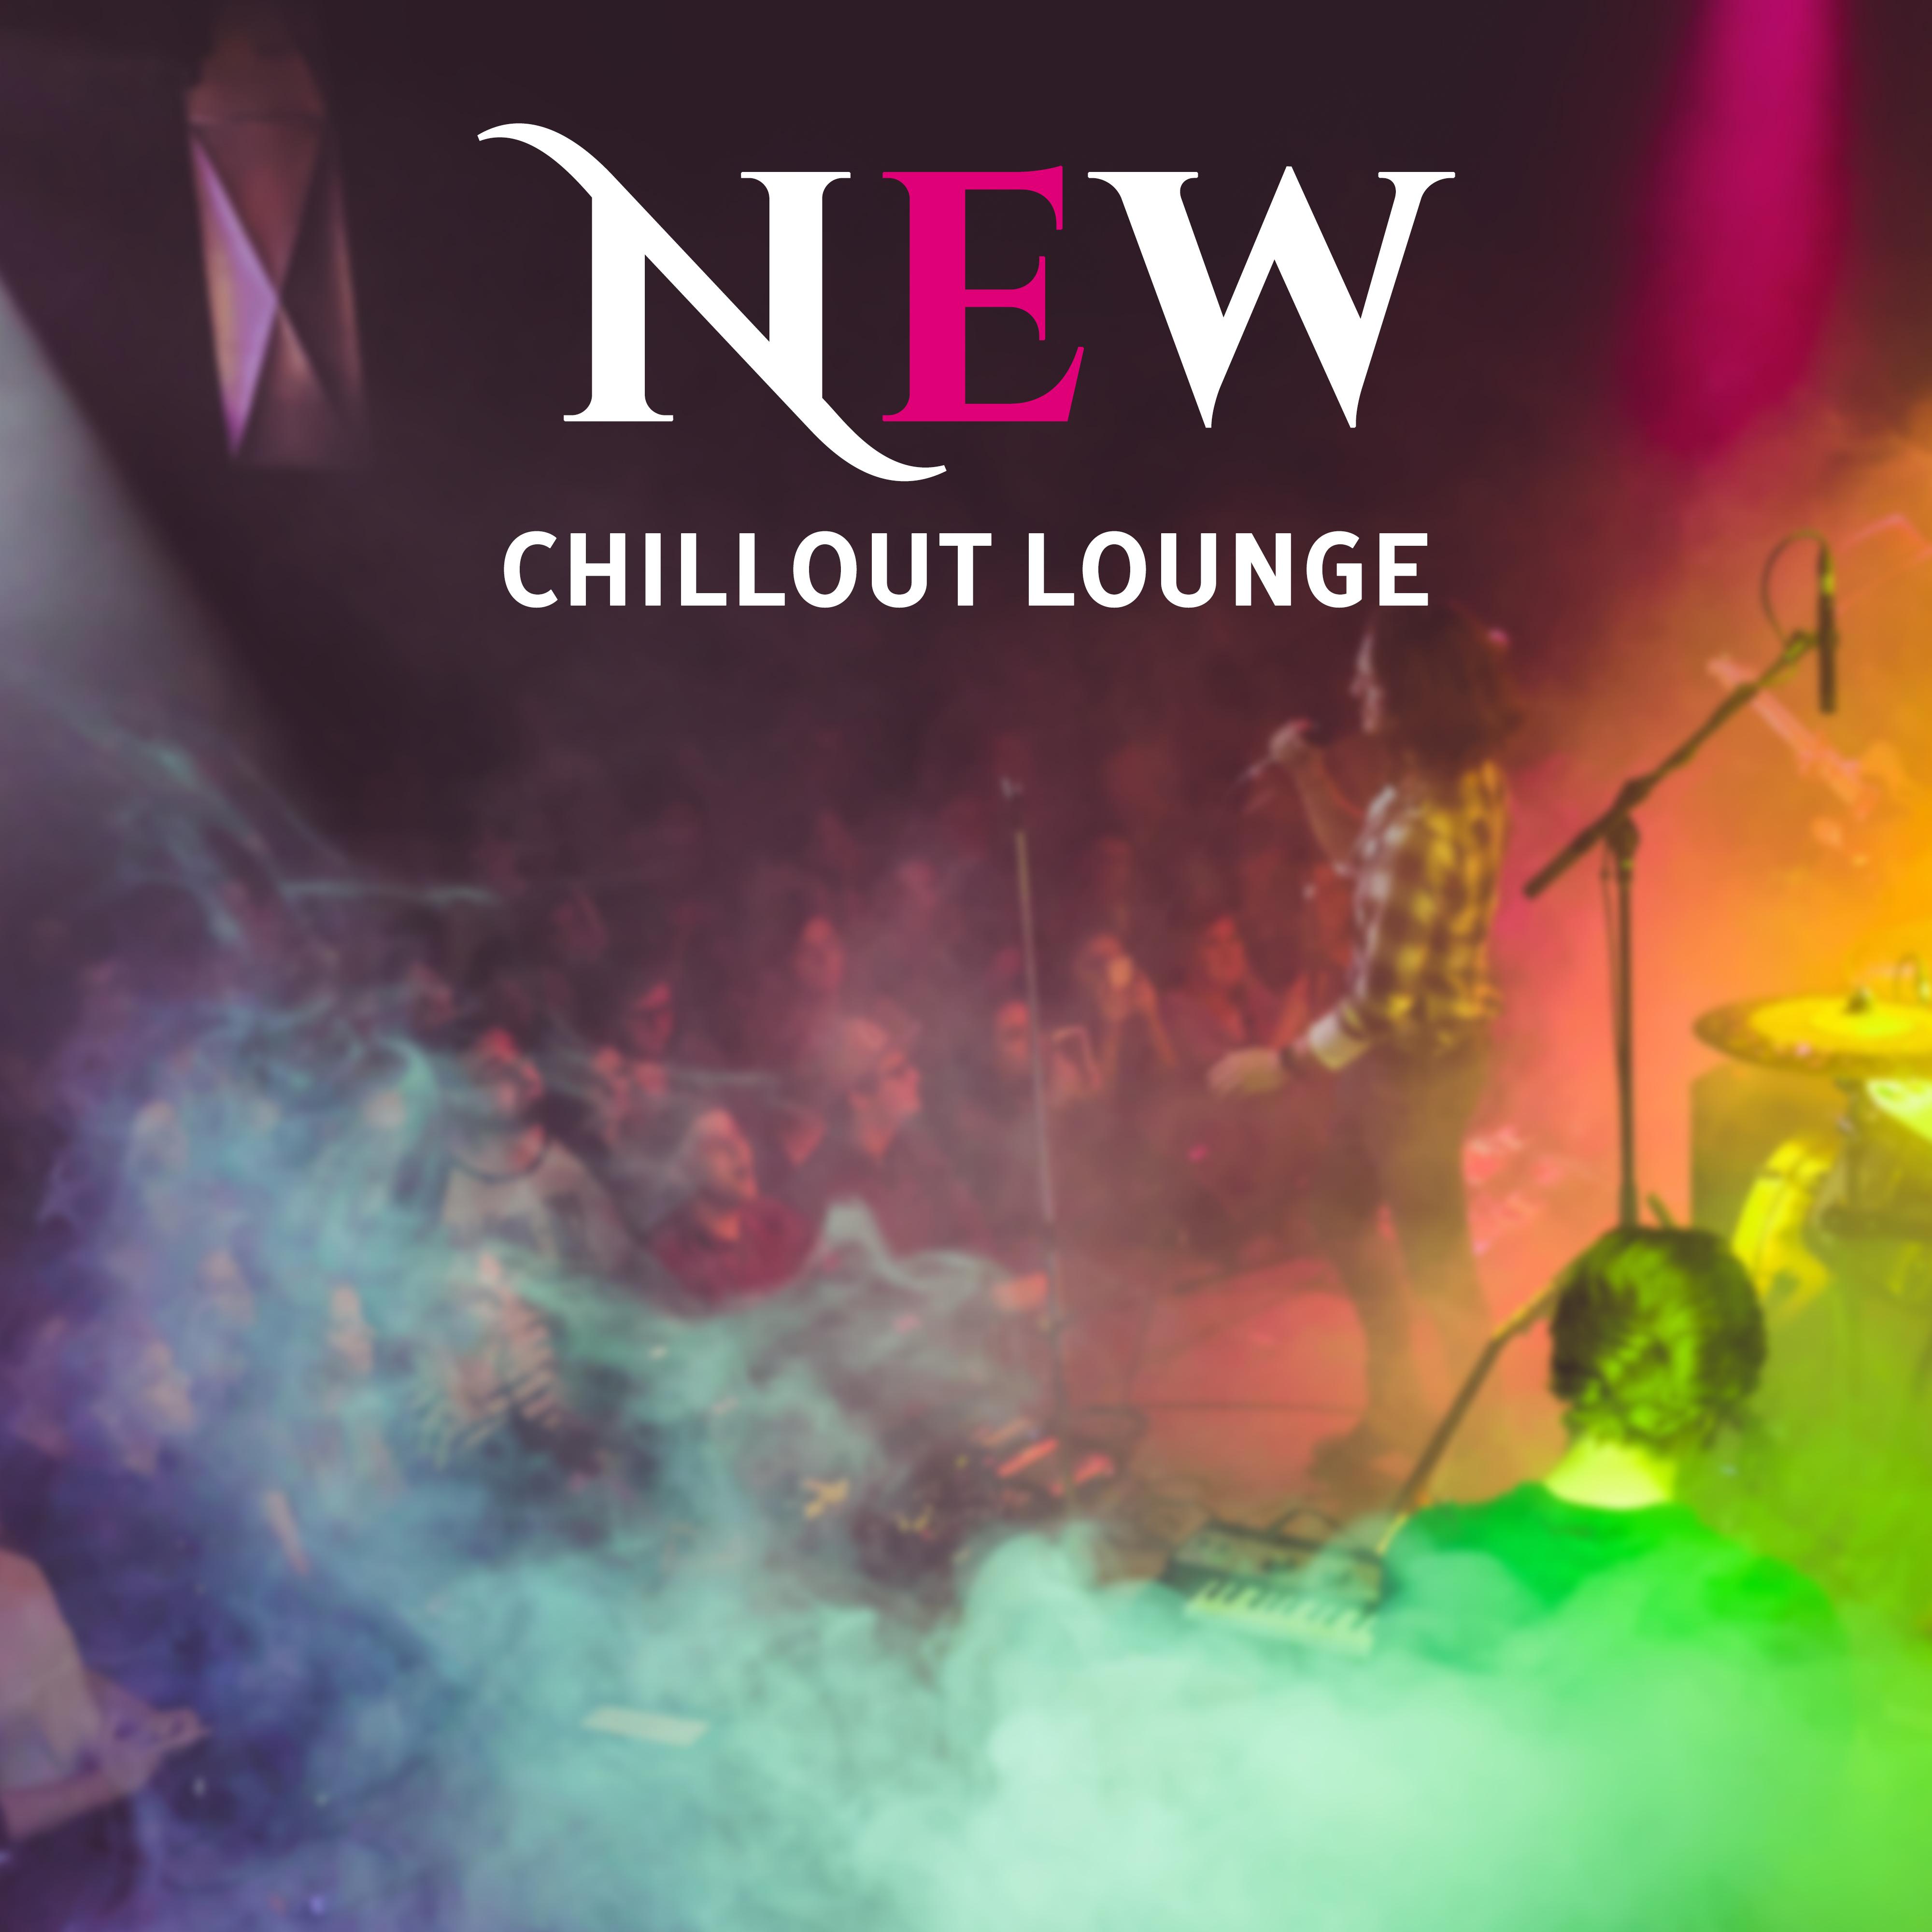 New Chillout Lounge